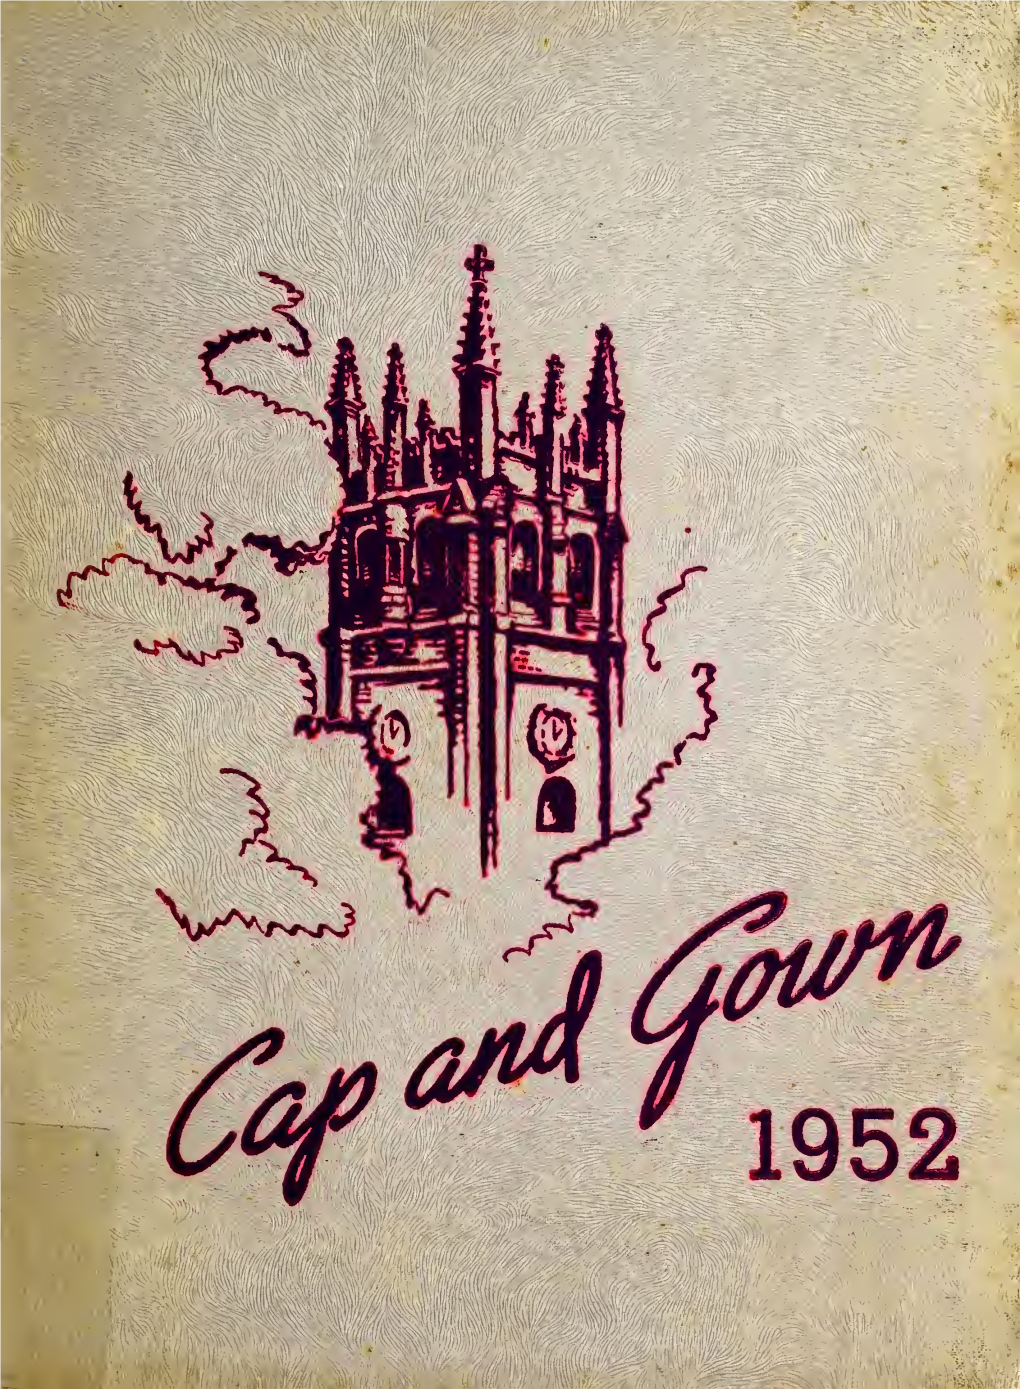 Cap and Gown, 1952